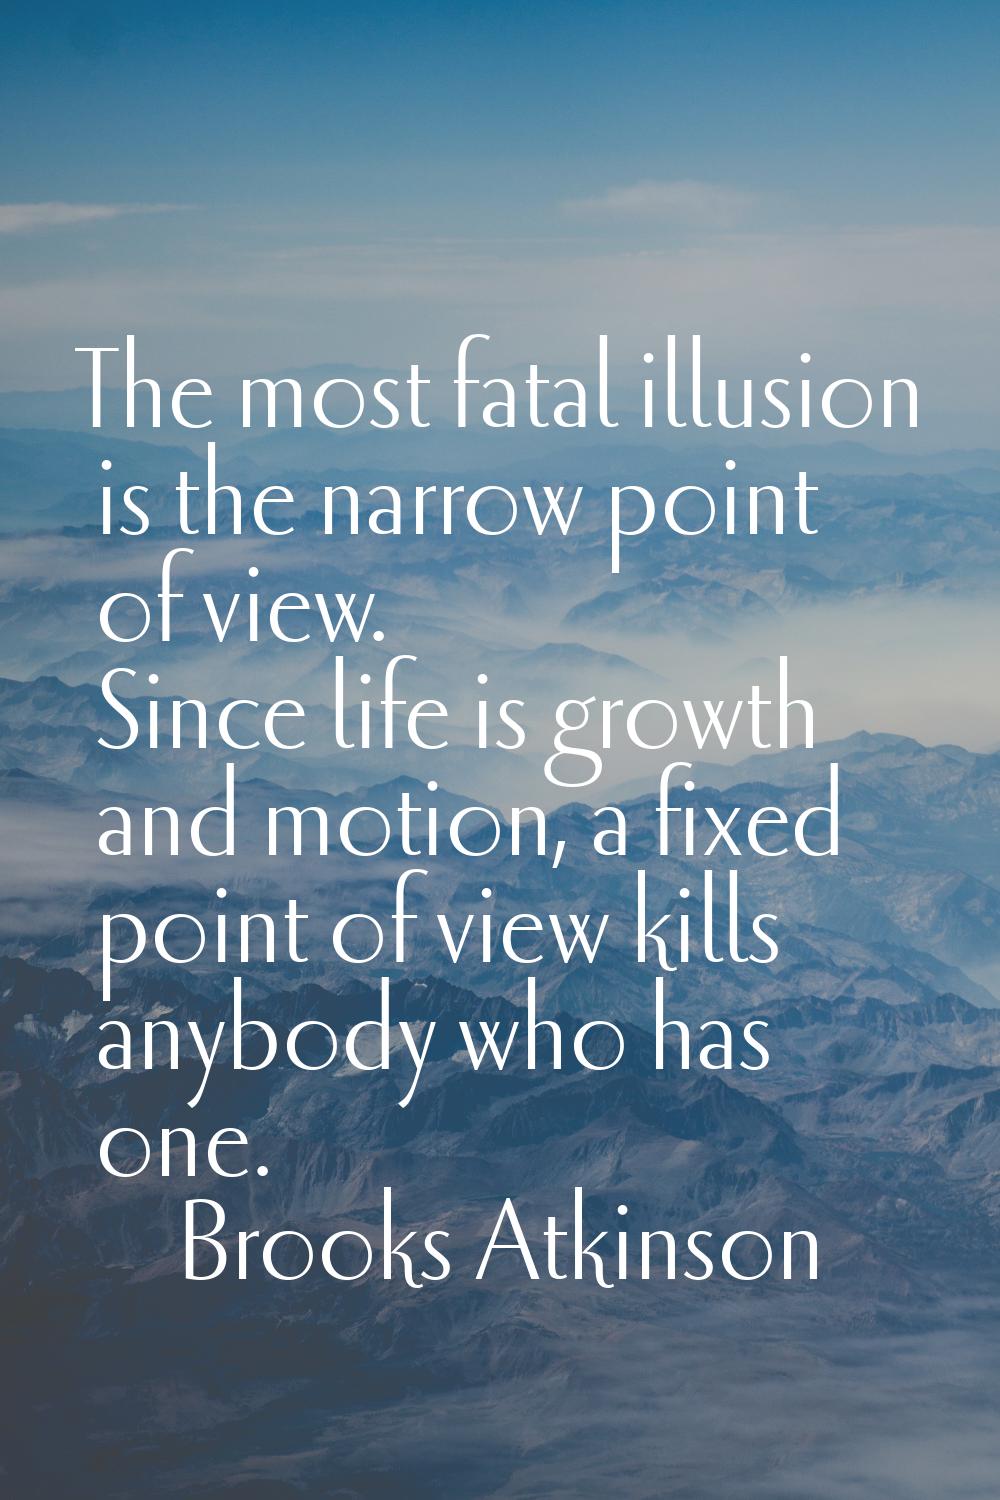 The most fatal illusion is the narrow point of view. Since life is growth and motion, a fixed point